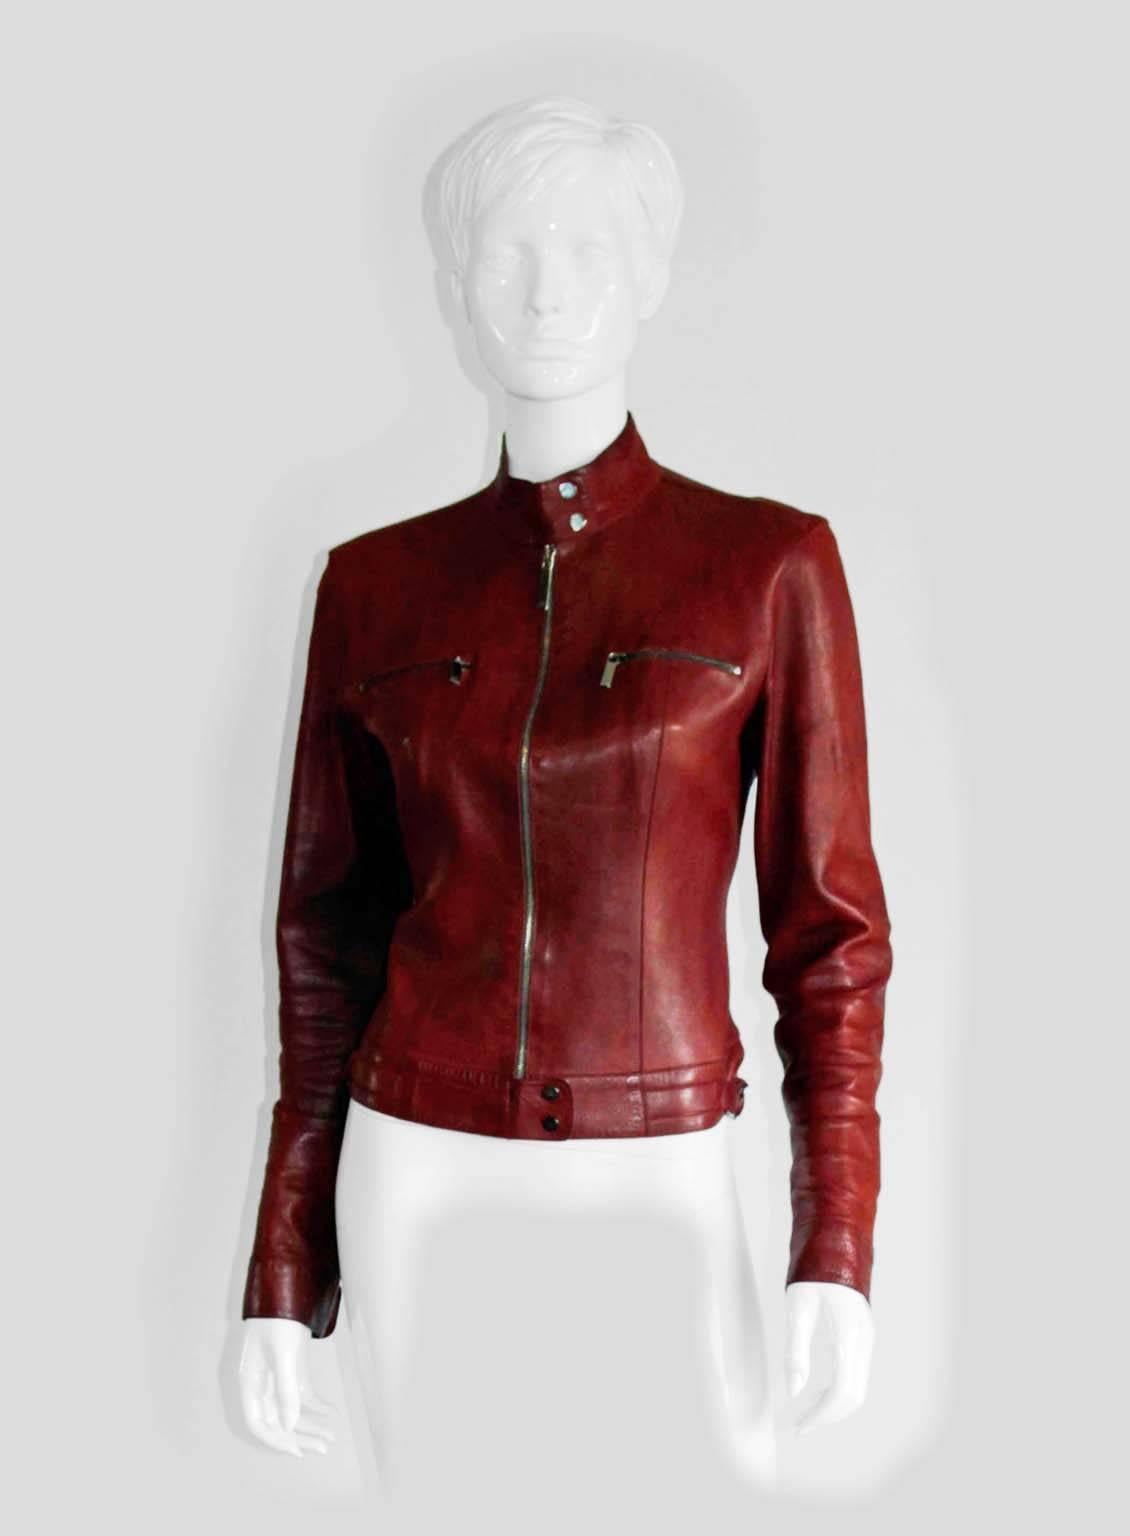 Gorgeous Tom Ford For Gucci Spring/Summer 1999 Maroon Leather Moto Jacket!

This gorgeous moto jacket is an italian size 44 & fits a US size 6-8 beautifully. This jacket is in lovely condition with only minimal signs of wear, & is an absolute must